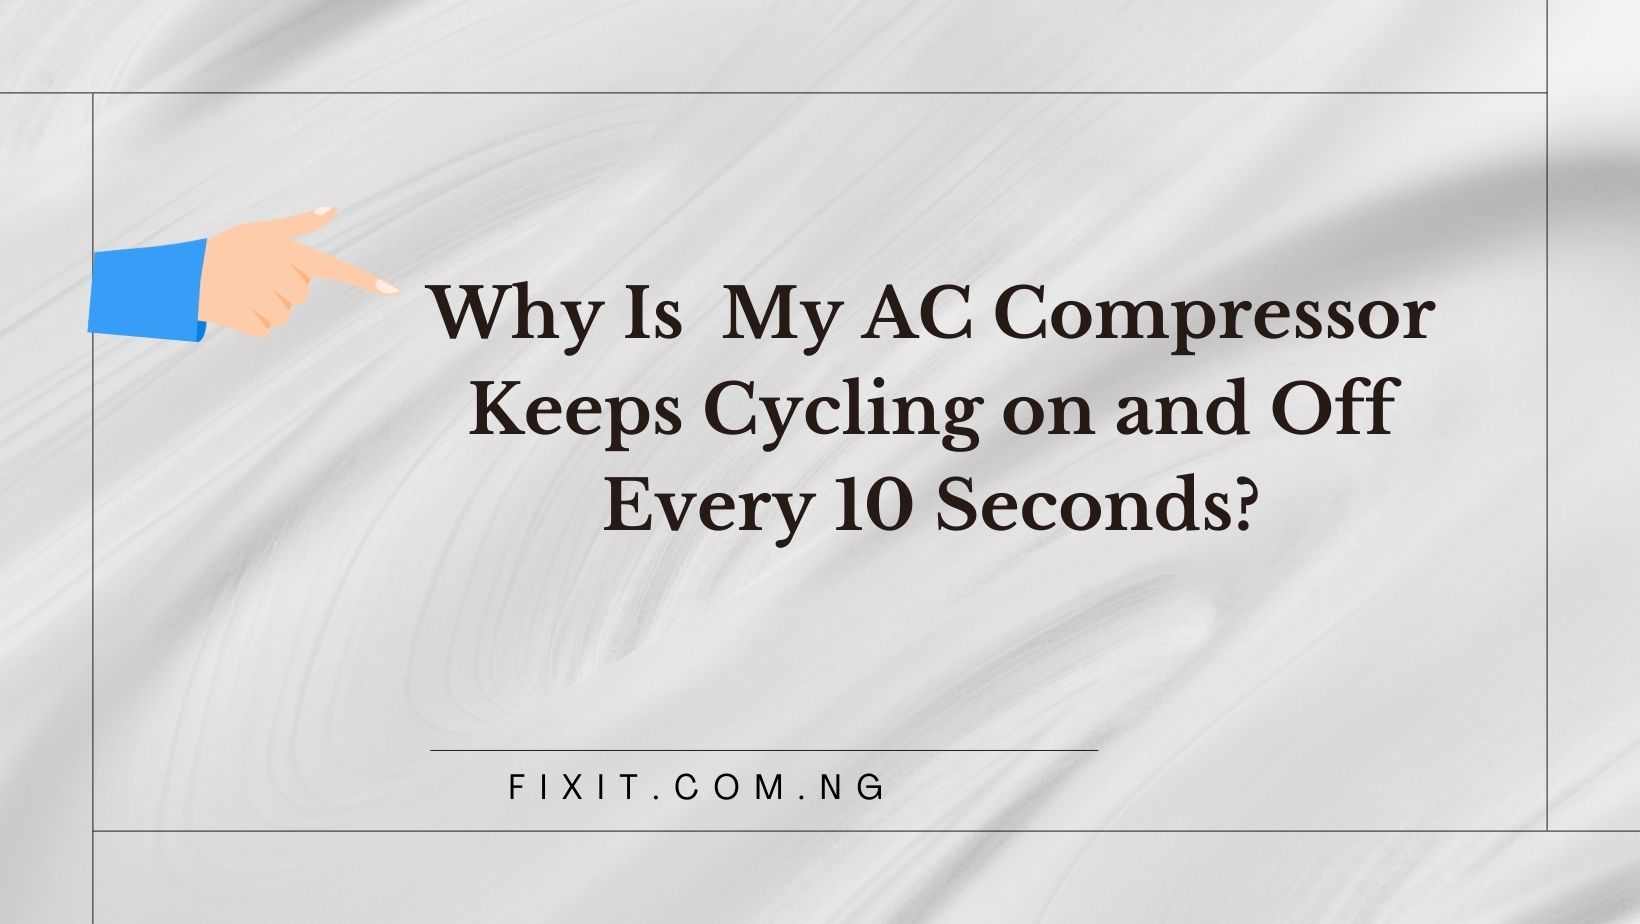 ac compressor cycles on and off every 10 seconds